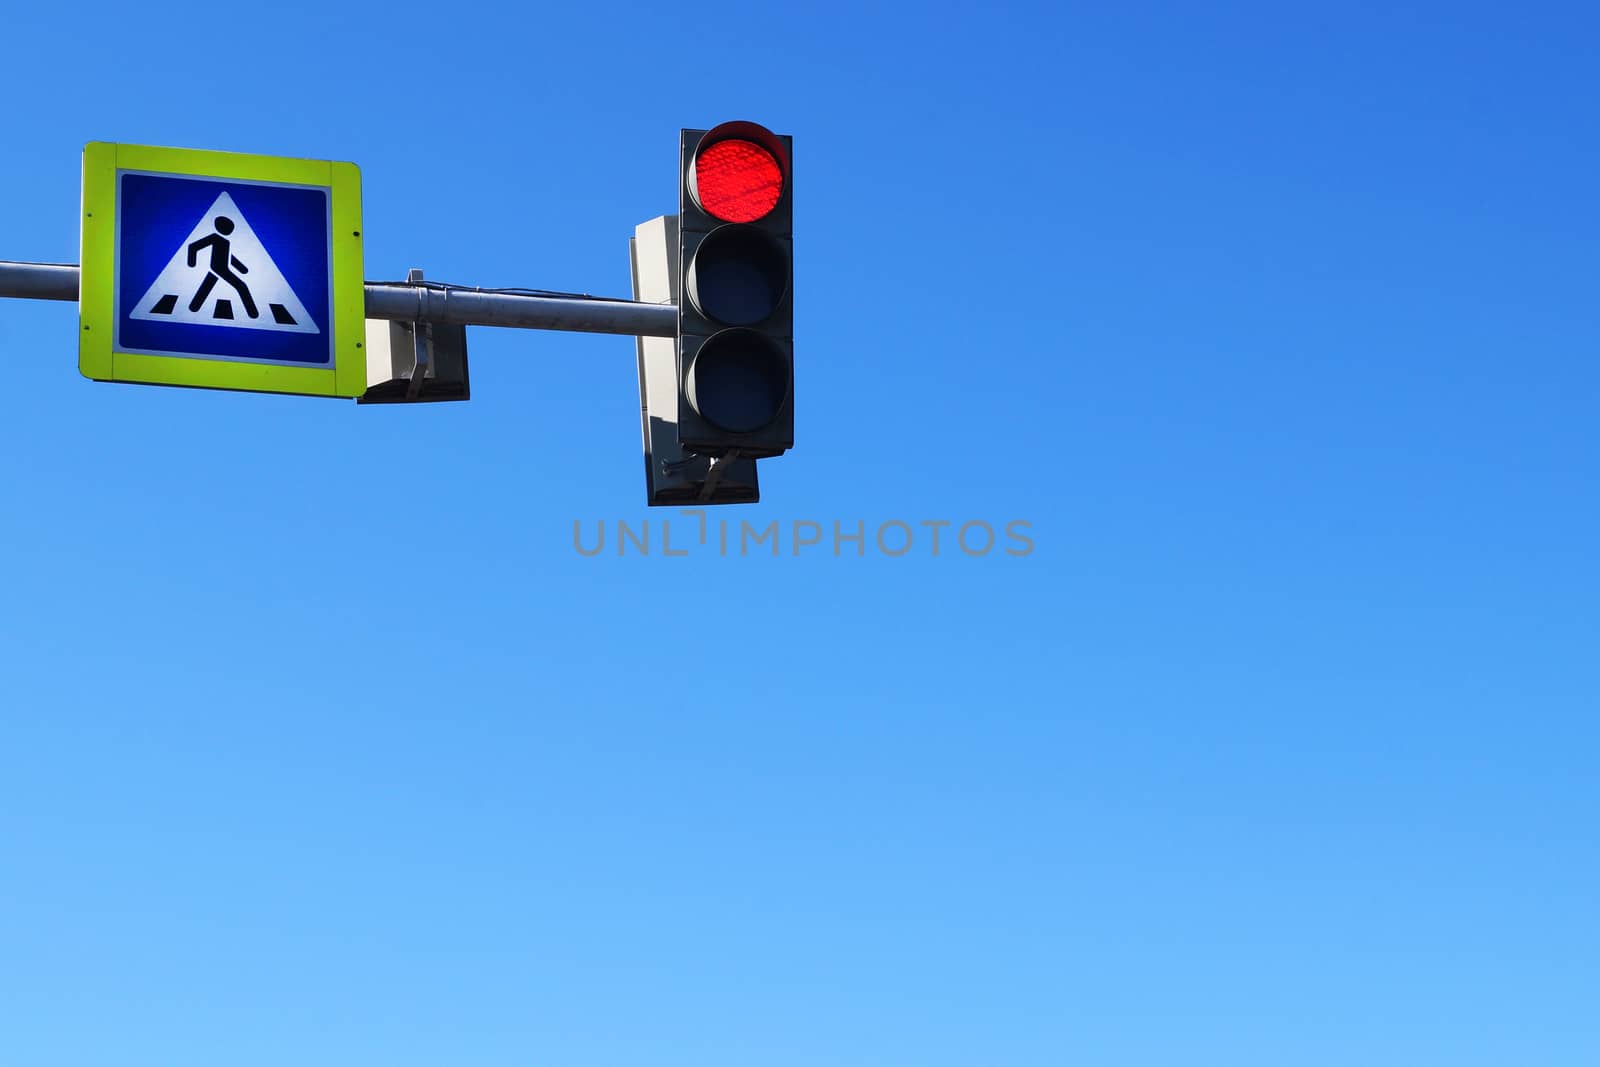 crosswalk sign and red traffic light on blue sky background, copy space by Annado